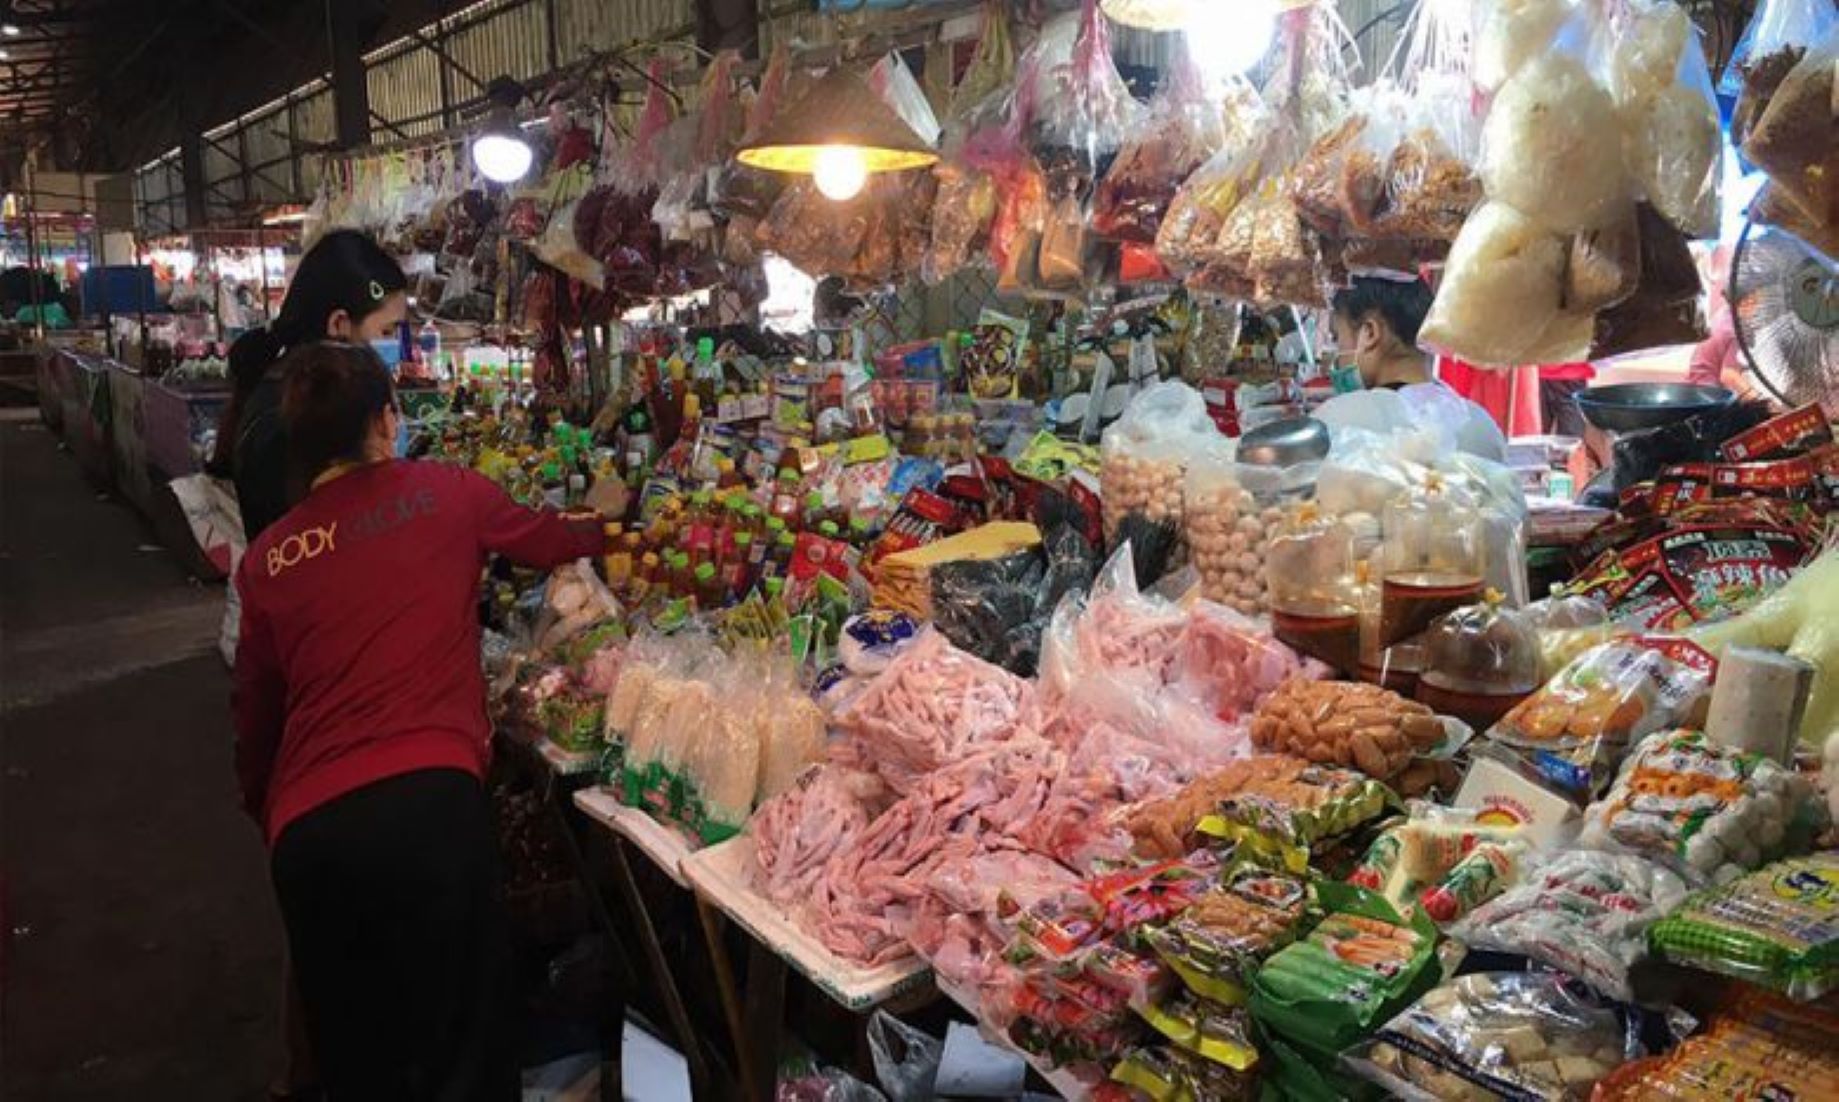 Inflation In Laos Accelerated To 38.46 Percent In Nov